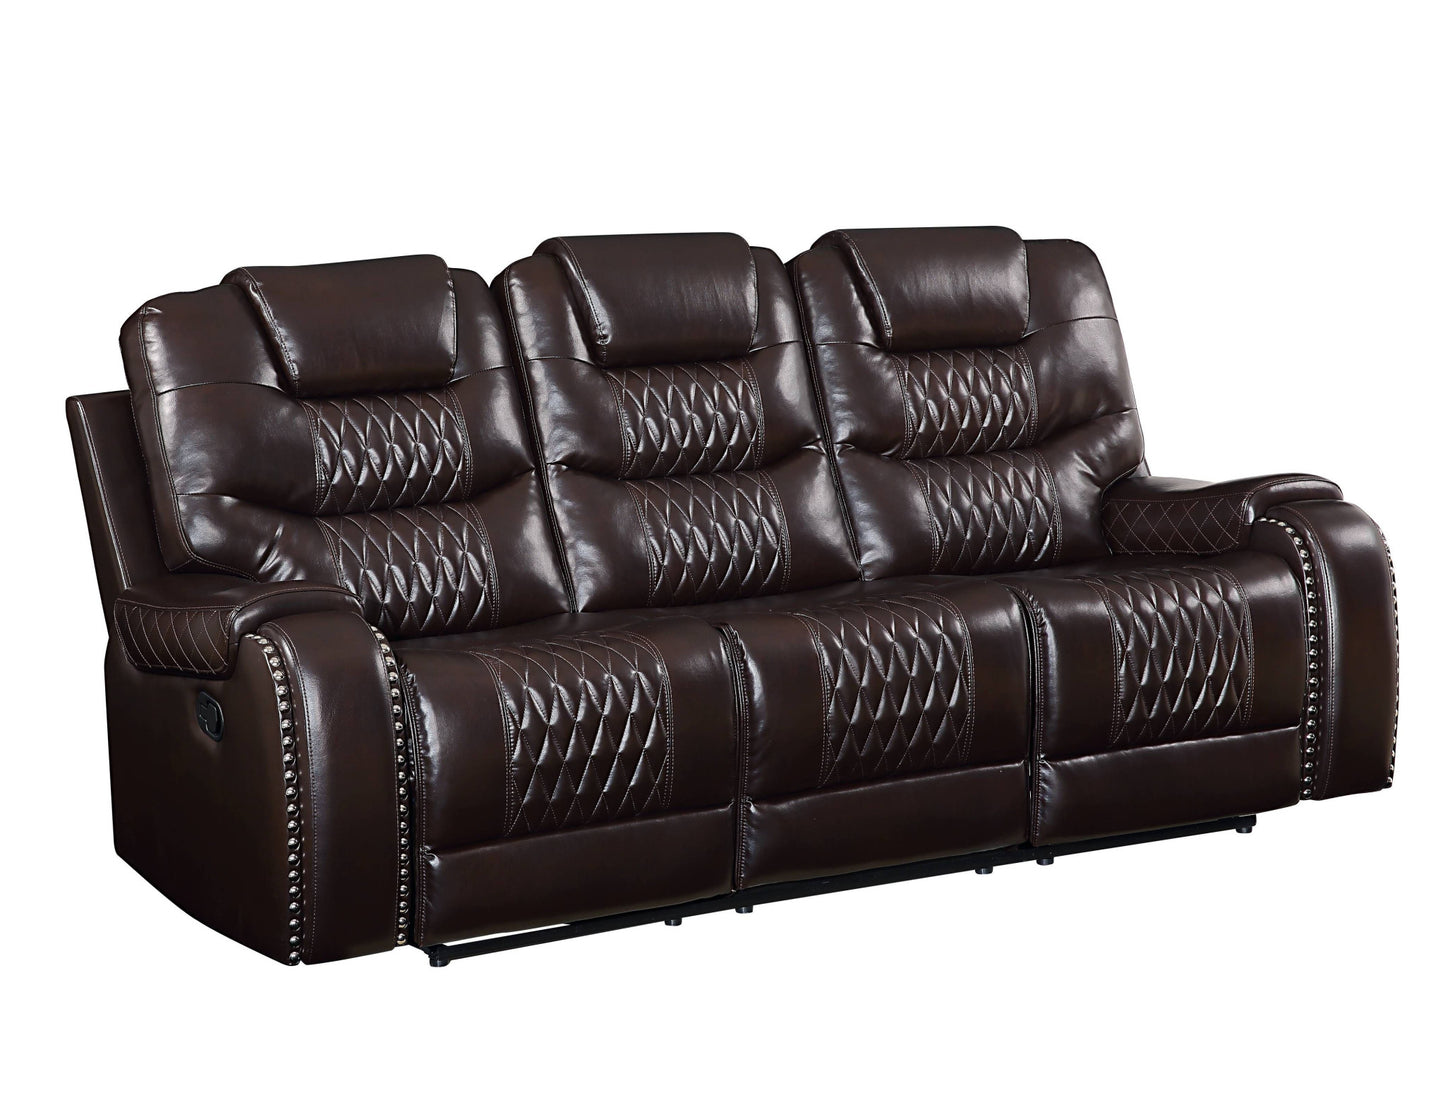 90" Brown And Black Faux Leather Reclining Sofa